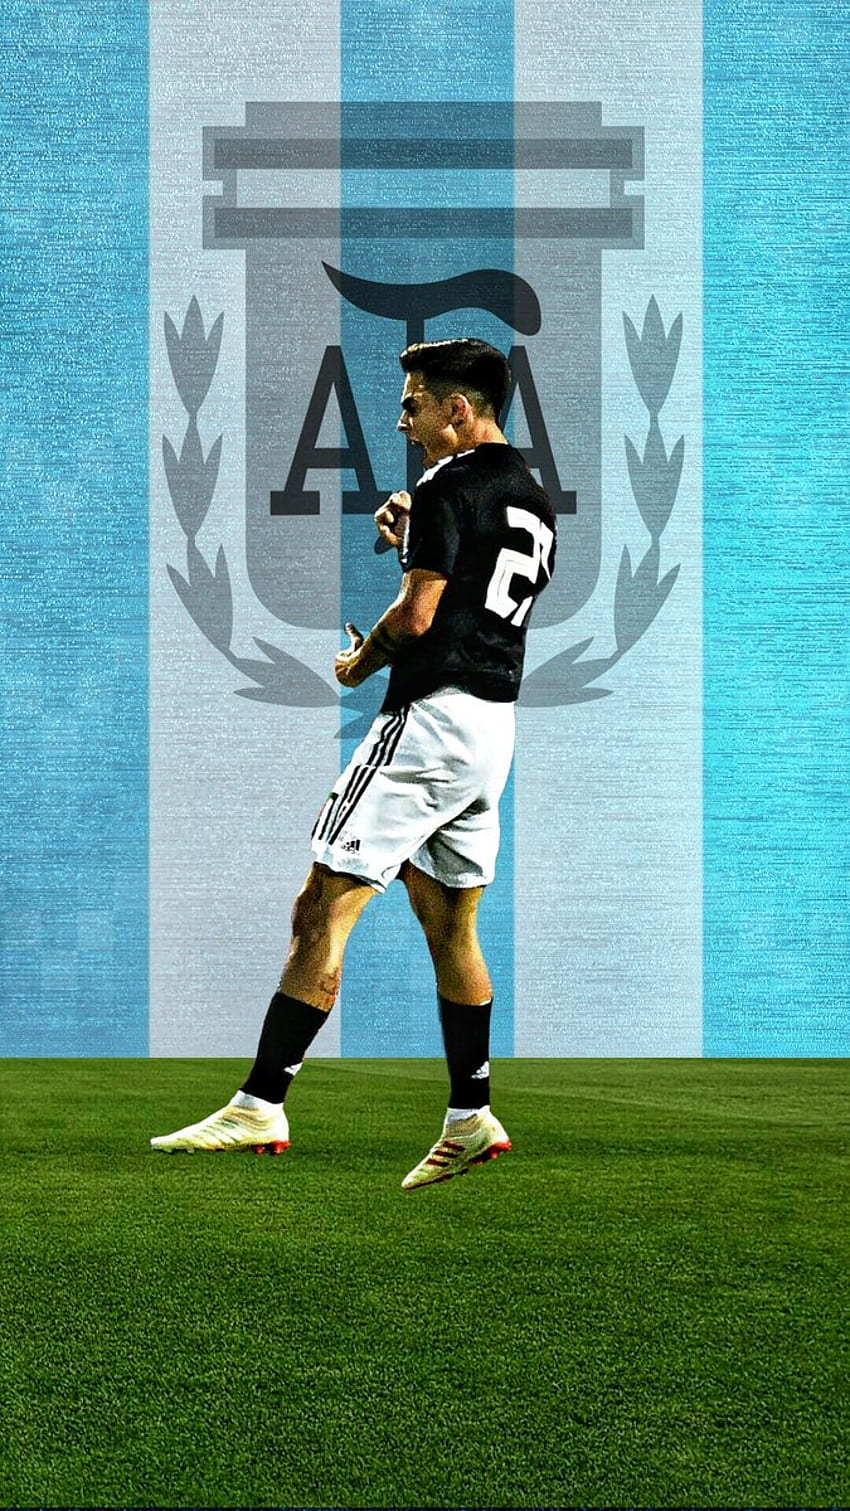 Ams_R - Dybala First Goal for Argentina HD phone wallpaper